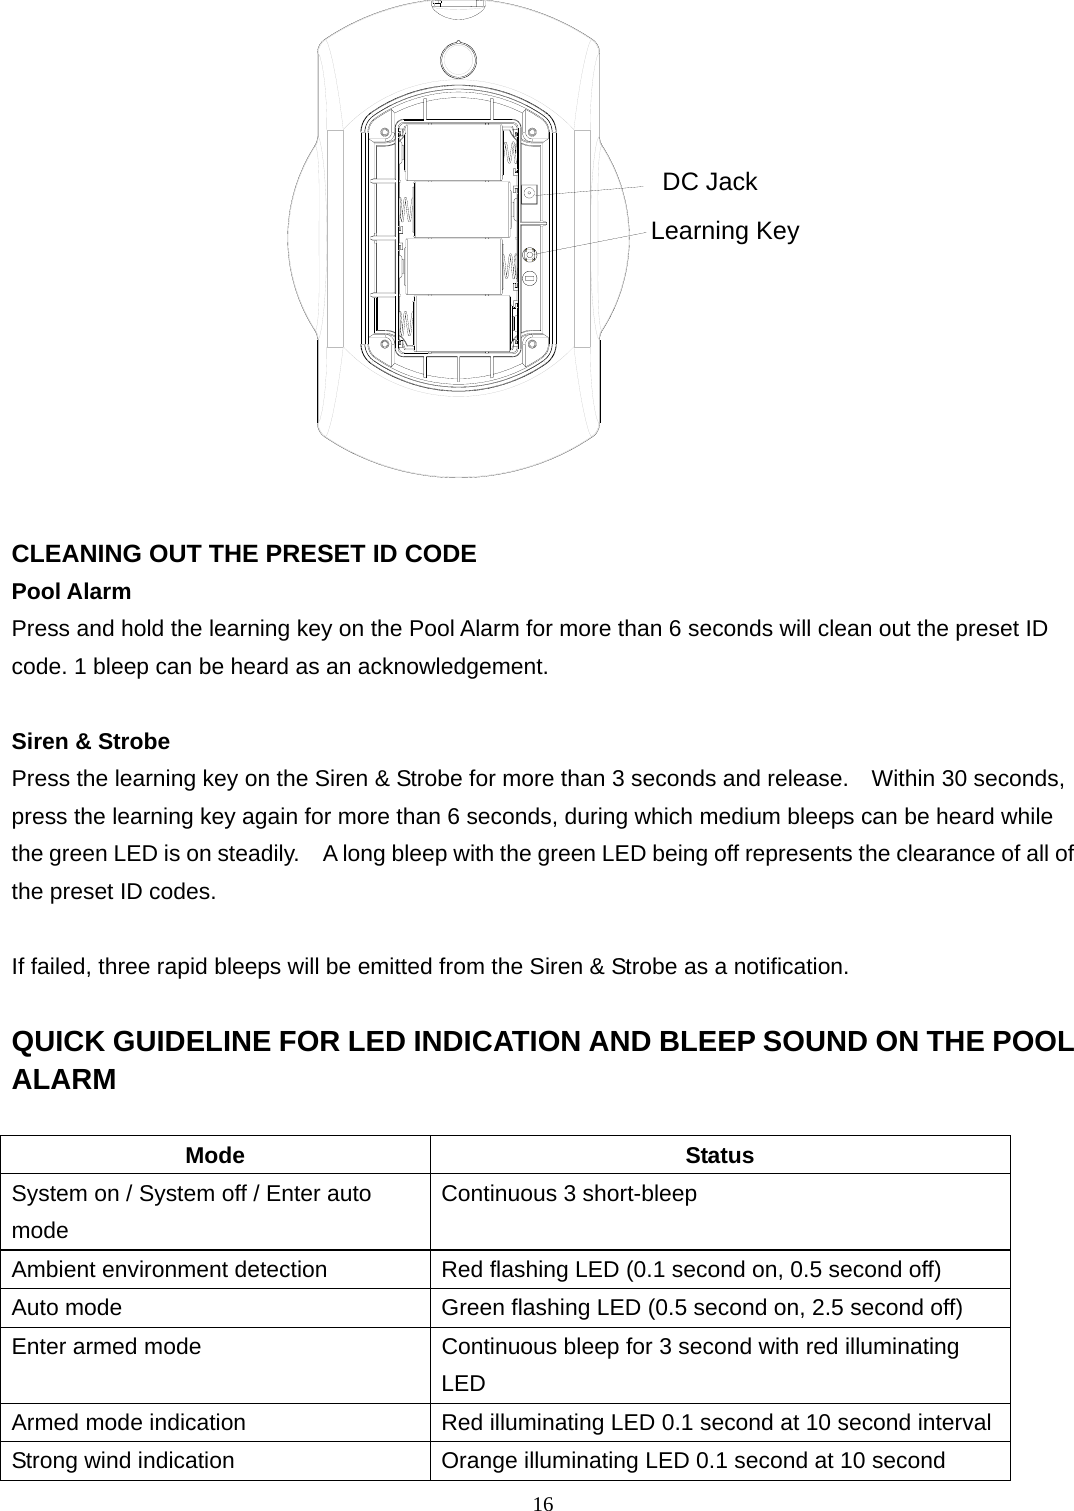 Learning KeyDC Jack  CLEANING OUT THE PRESET ID CODE Pool Alarm Press and hold the learning key on the Pool Alarm for more than 6 seconds will clean out the preset ID code. 1 bleep can be heard as an acknowledgement.  Siren &amp; Strobe Press the learning key on the Siren &amp; Strobe for more than 3 seconds and release.    Within 30 seconds, press the learning key again for more than 6 seconds, during which medium bleeps can be heard while the green LED is on steadily.    A long bleep with the green LED being off represents the clearance of all of the preset ID codes.  If failed, three rapid bleeps will be emitted from the Siren &amp; Strobe as a notification.  QUICK GUIDELINE FOR LED INDICATION AND BLEEP SOUND ON THE POOL ALARM  Mode Status System on / System off / Enter auto mode Continuous 3 short-bleep Ambient environment detection  Red flashing LED (0.1 second on, 0.5 second off) Auto mode  Green flashing LED (0.5 second on, 2.5 second off) Enter armed mode  Continuous bleep for 3 second with red illuminating LED Armed mode indication  Red illuminating LED 0.1 second at 10 second intervalStrong wind indication  Orange illuminating LED 0.1 second at 10 second 16 